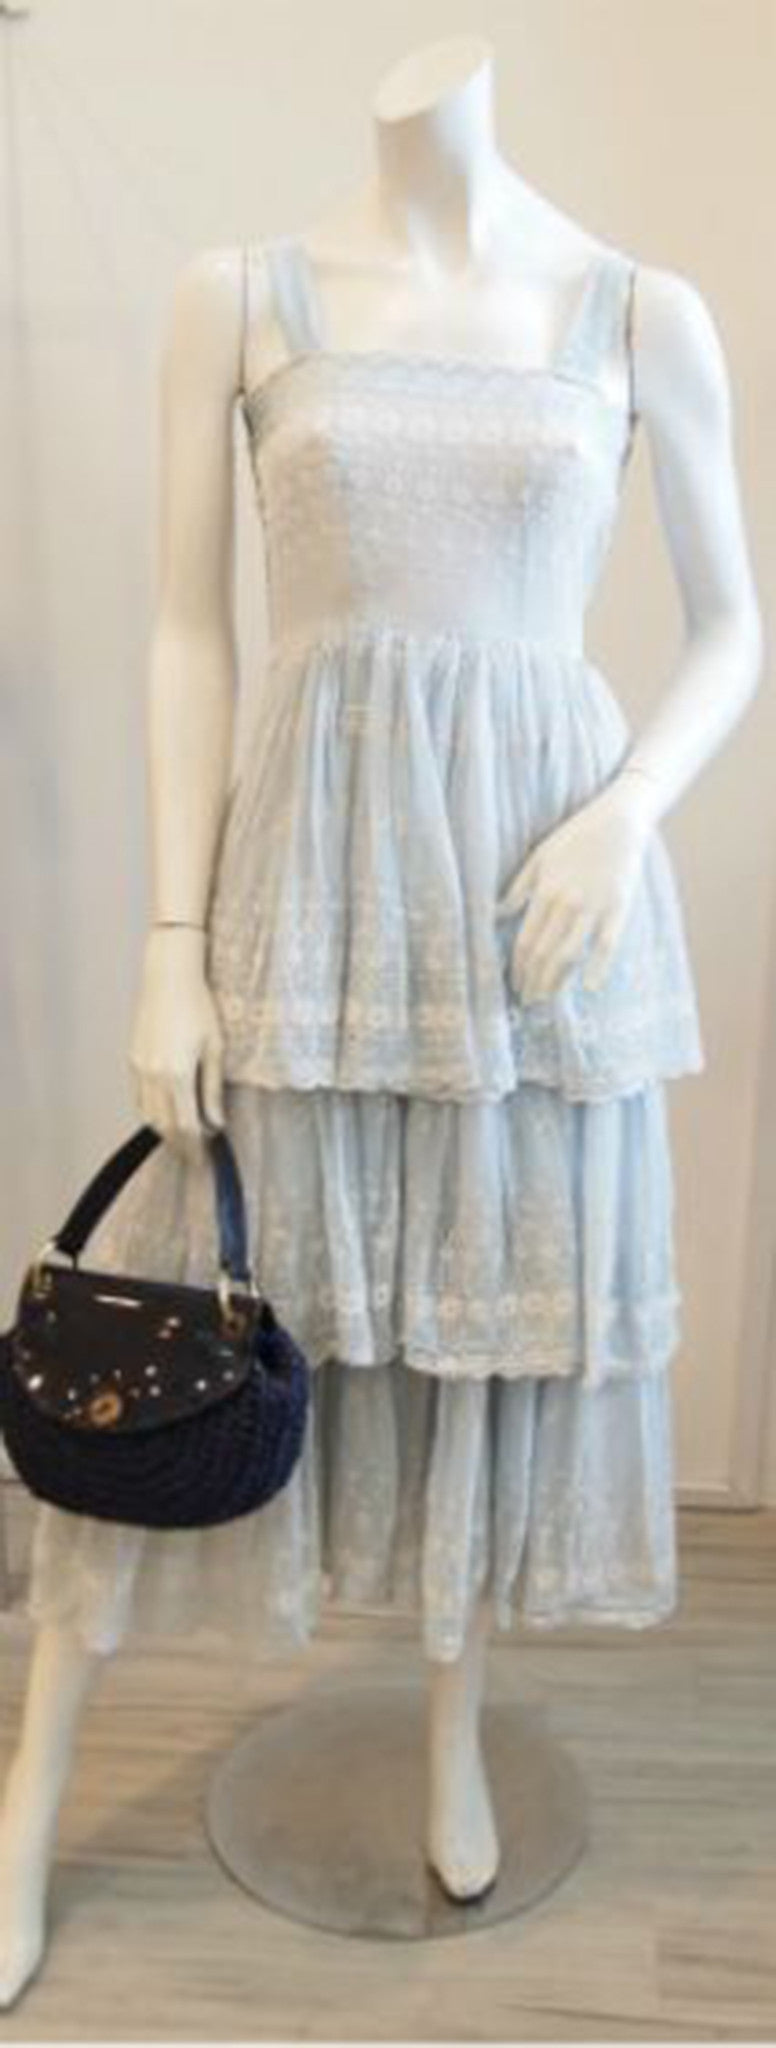 The Sky is Blue Broderie Anglaise Lace Dress